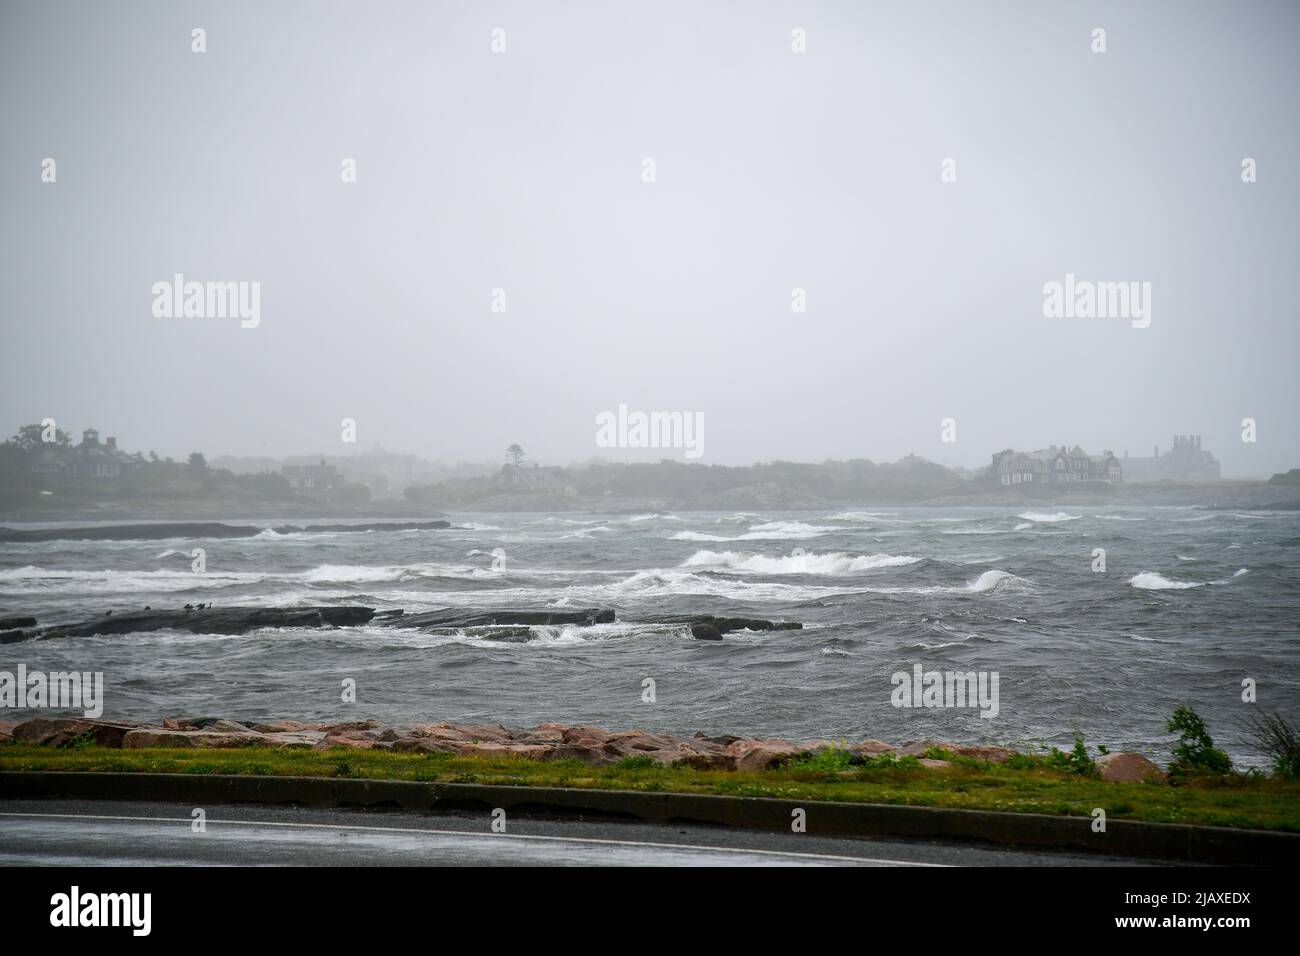 Stock photos of Tropical Storm Elsa from 2021 drenching Newport, Rhode Island. Breaking waves in Newport Harbor during a storm on Aquidneck Island. Stock Photo